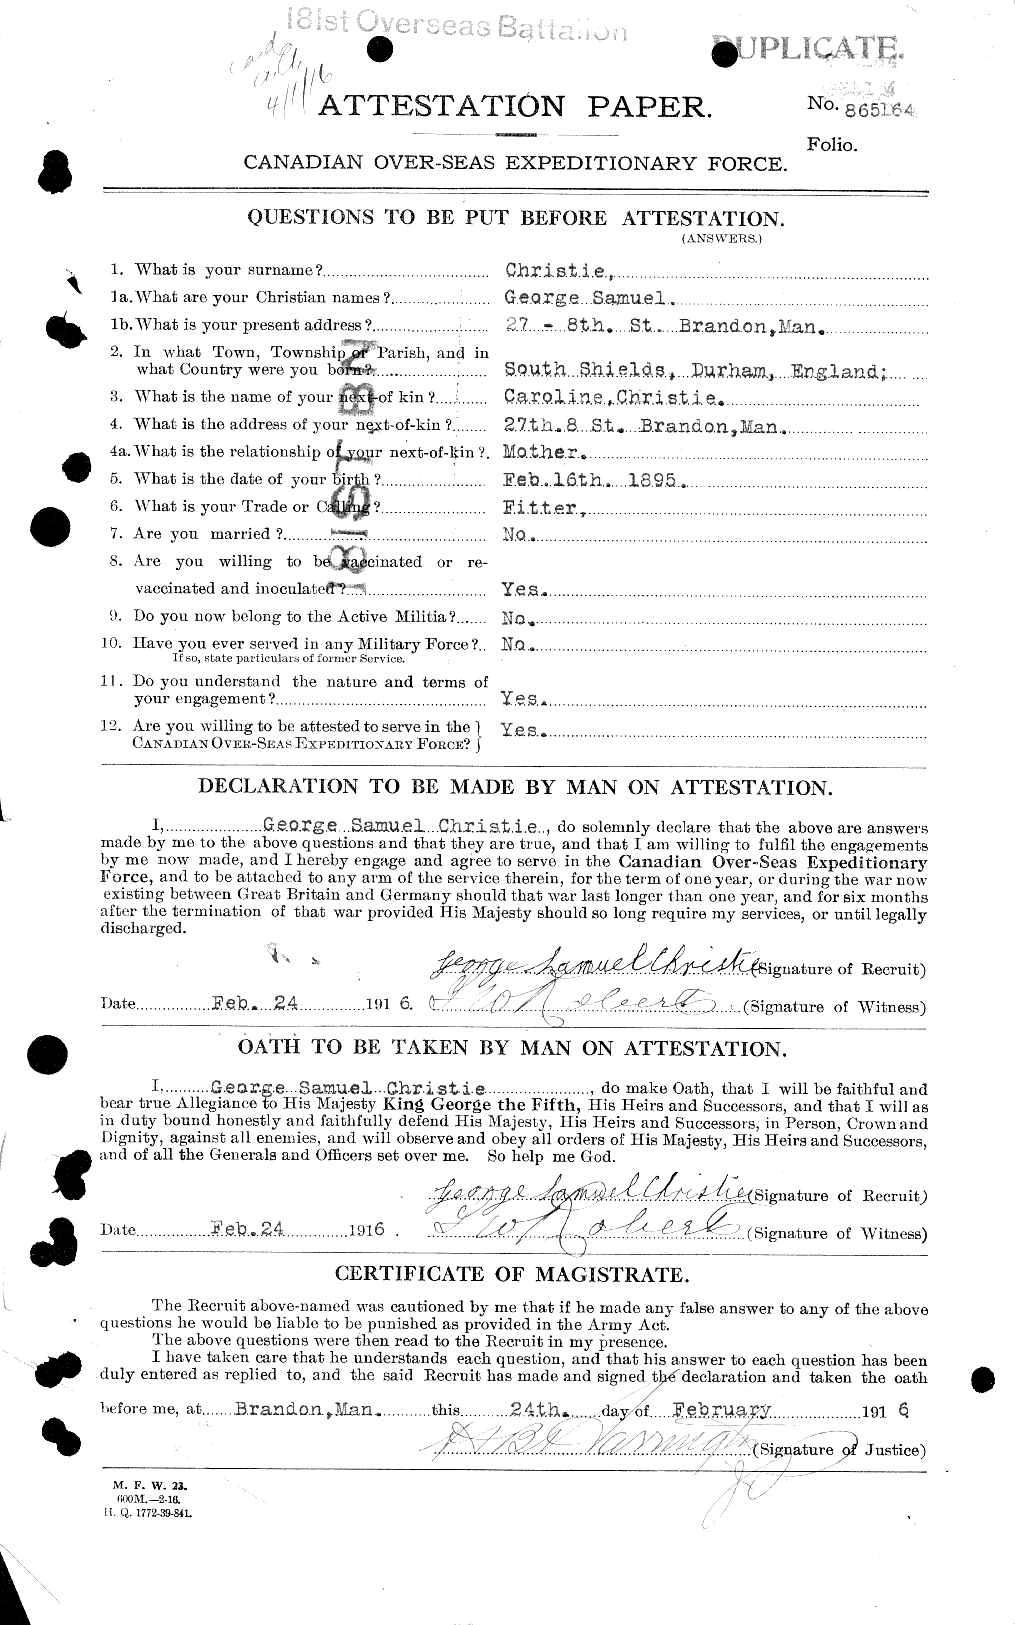 Personnel Records of the First World War - CEF 021949a